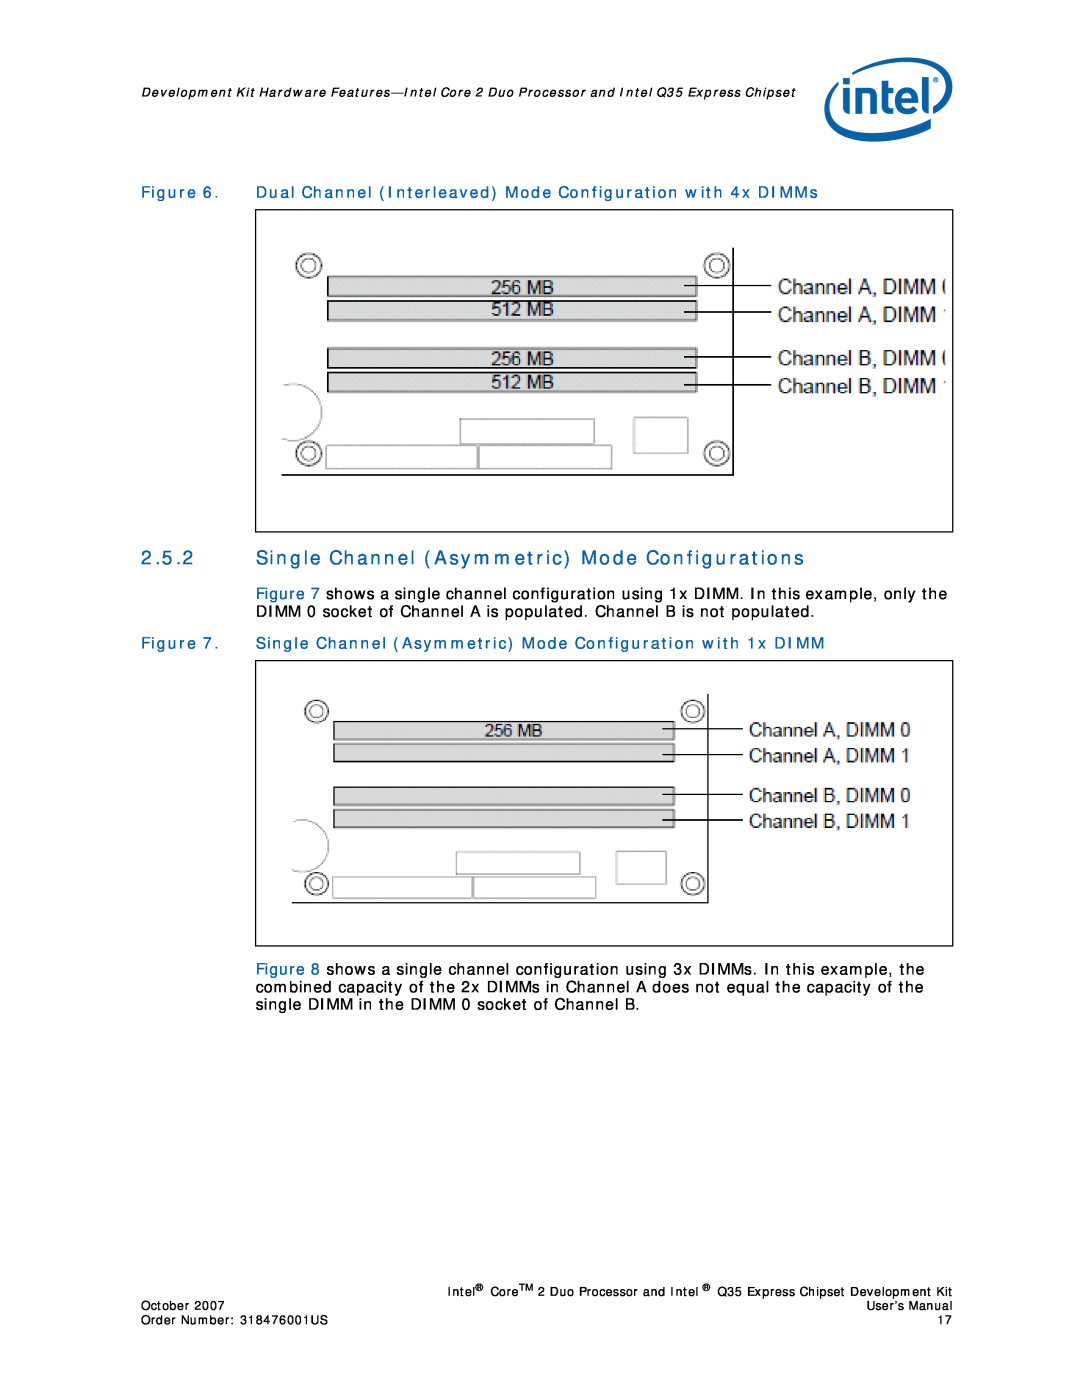 Intel Q35 Express Single Channel Asymmetric Mode Configurations, Dual Channel Interleaved Mode Configuration with 4x DIMMs 